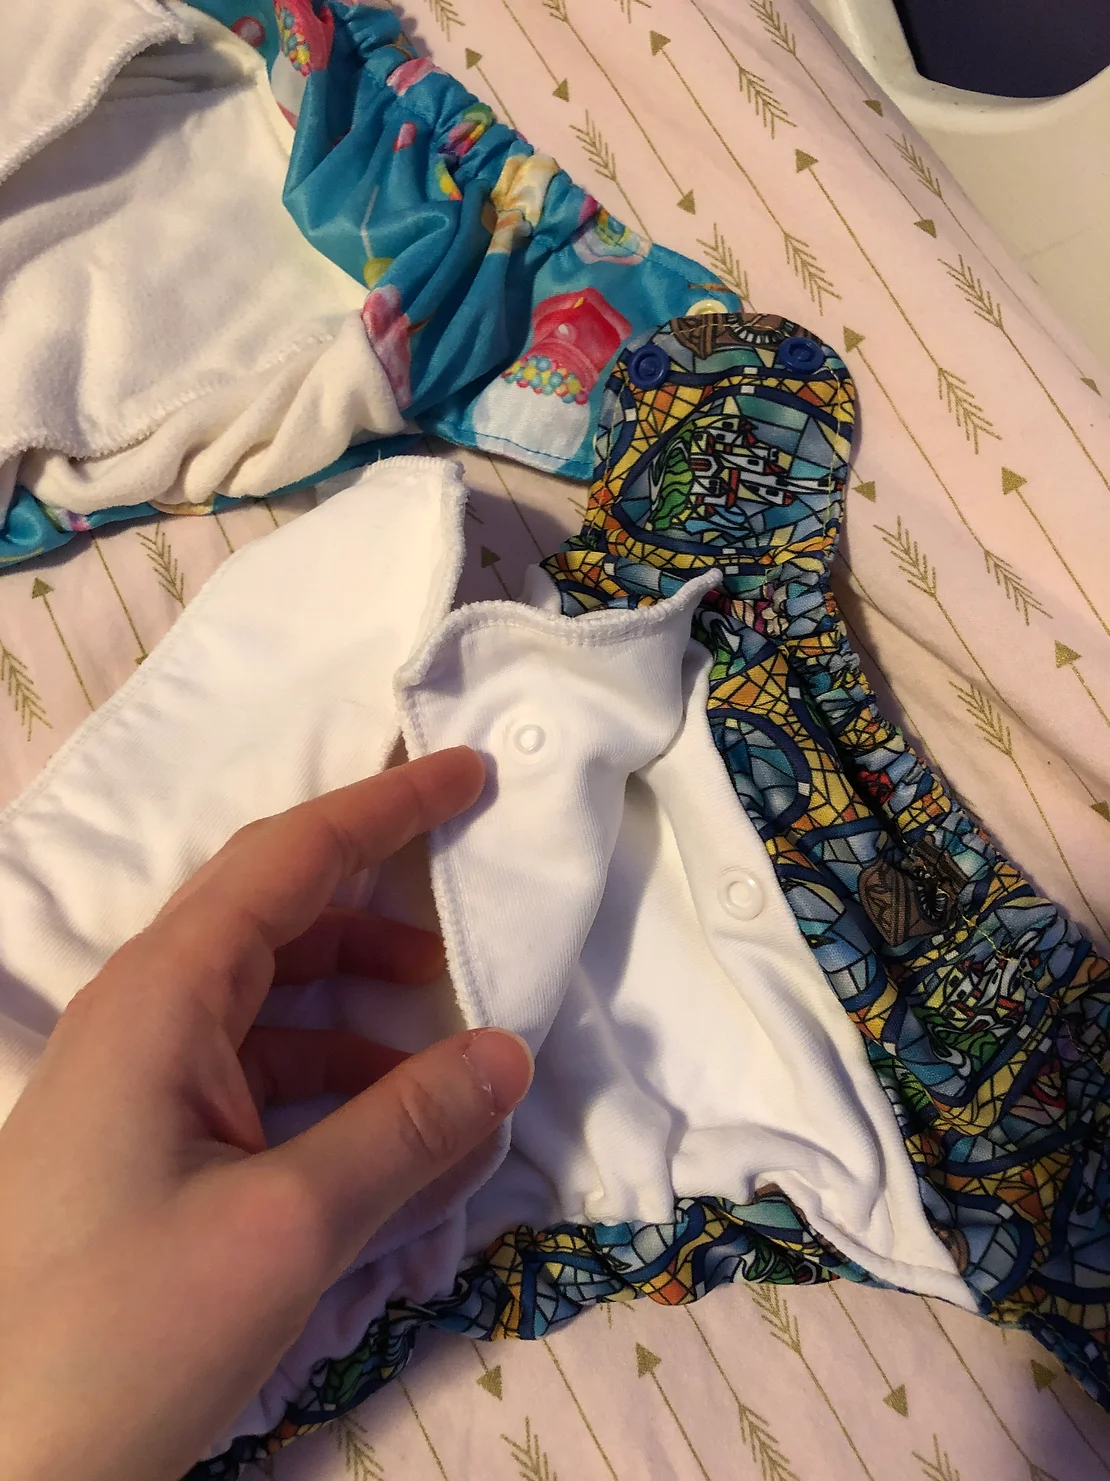 one diaper insert is sewn in and can be folded, the other diaper insert snaps in